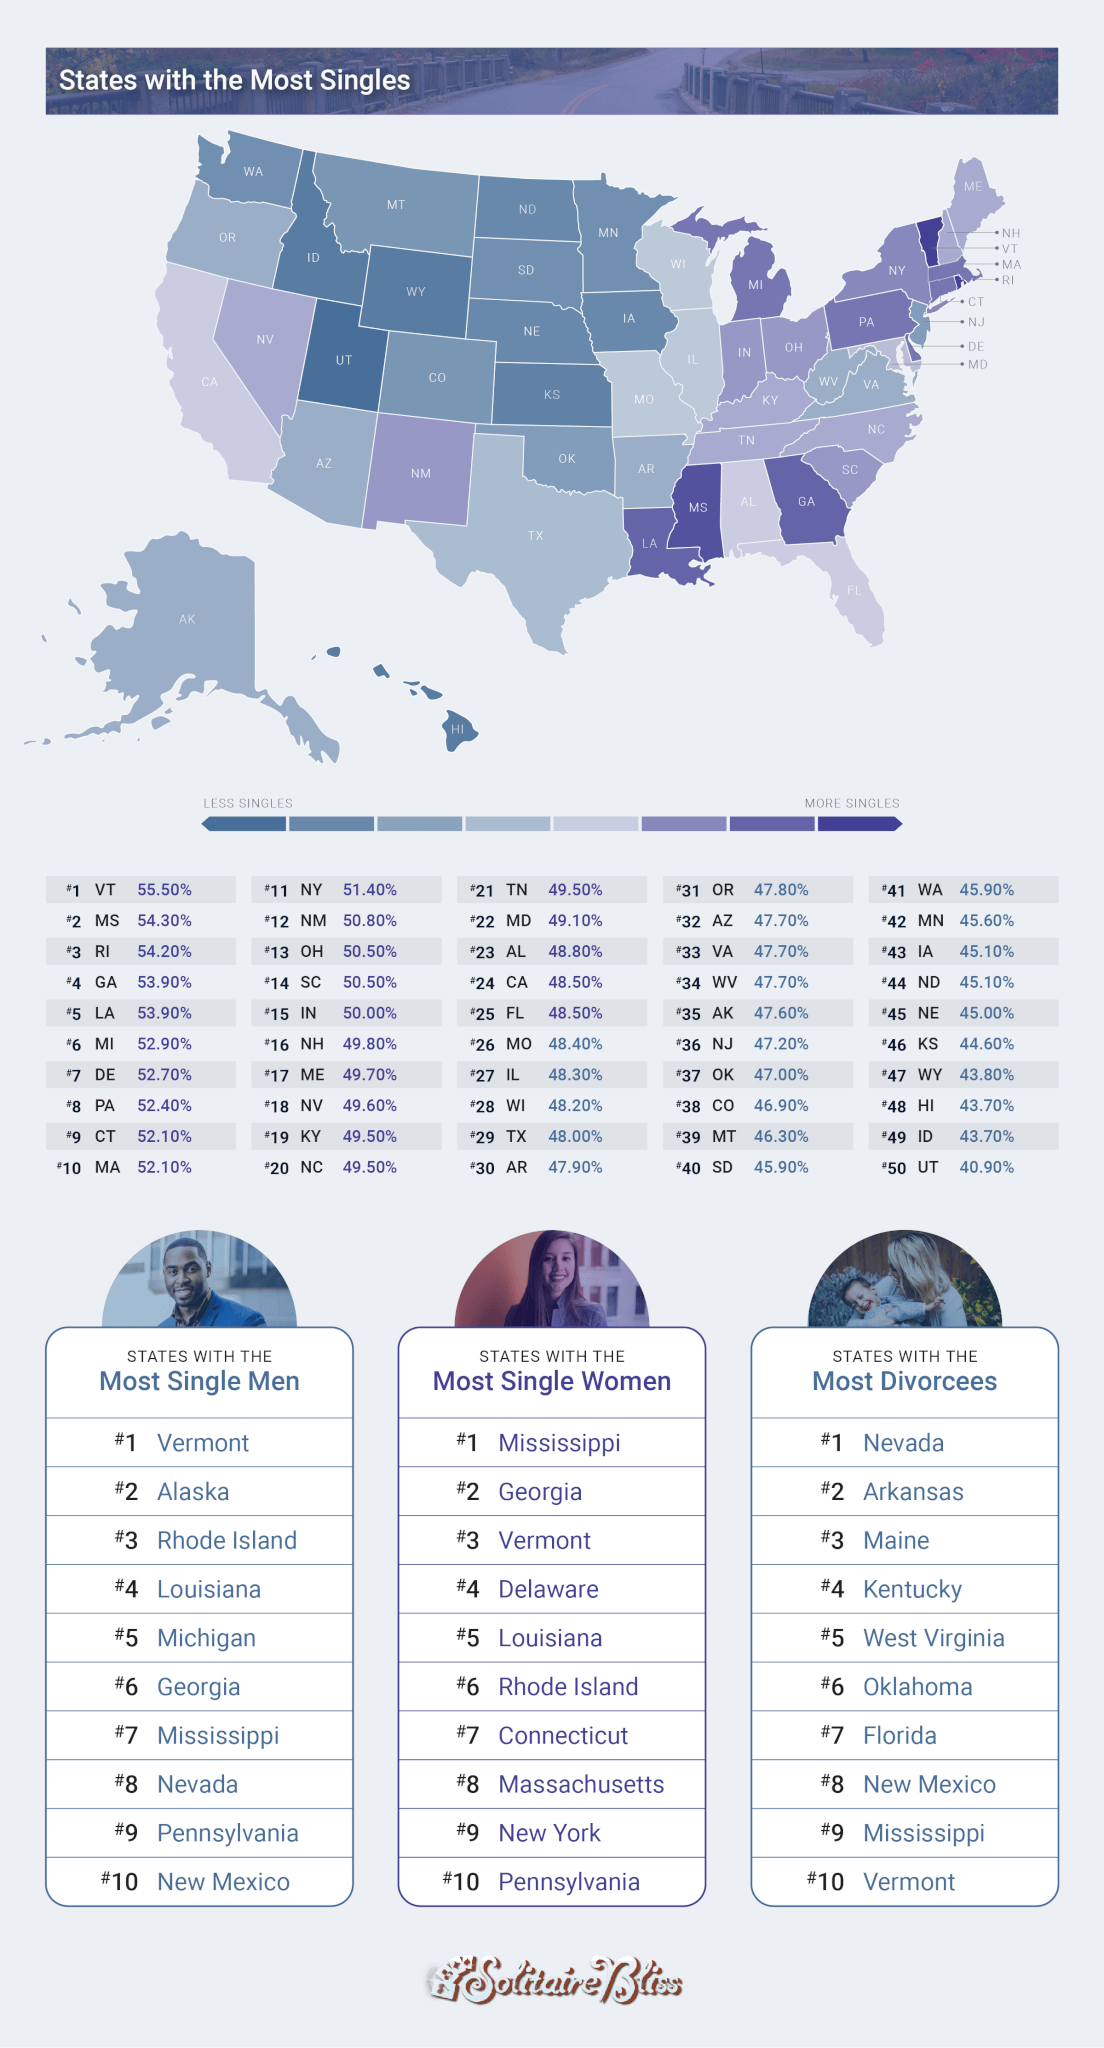 Looking for love? Here's where you'll find the most singles in the USA